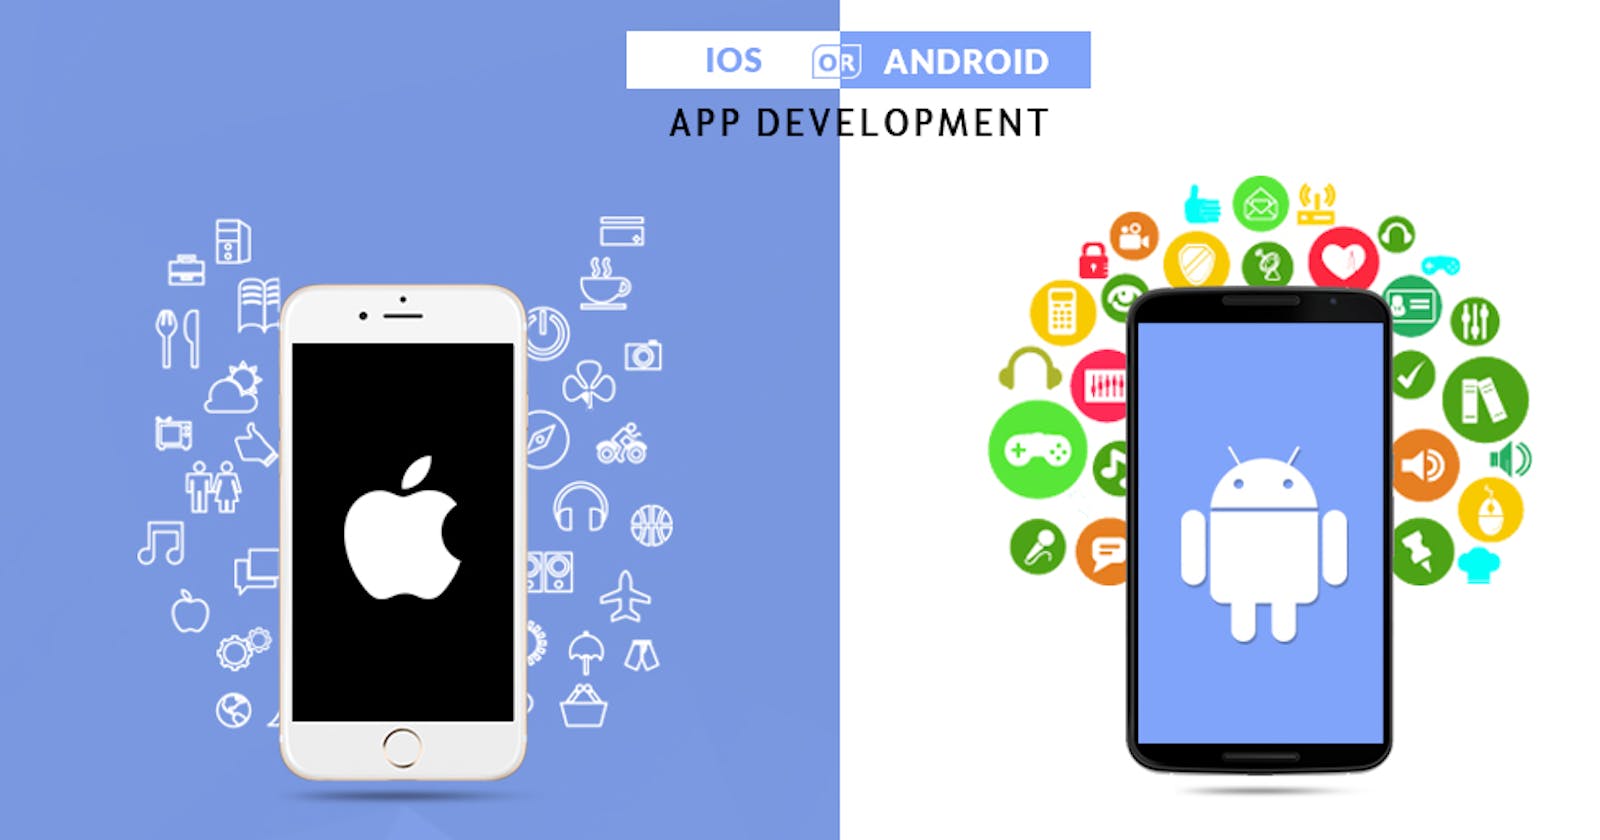 iPhone versus Android apps - what’s the difference?